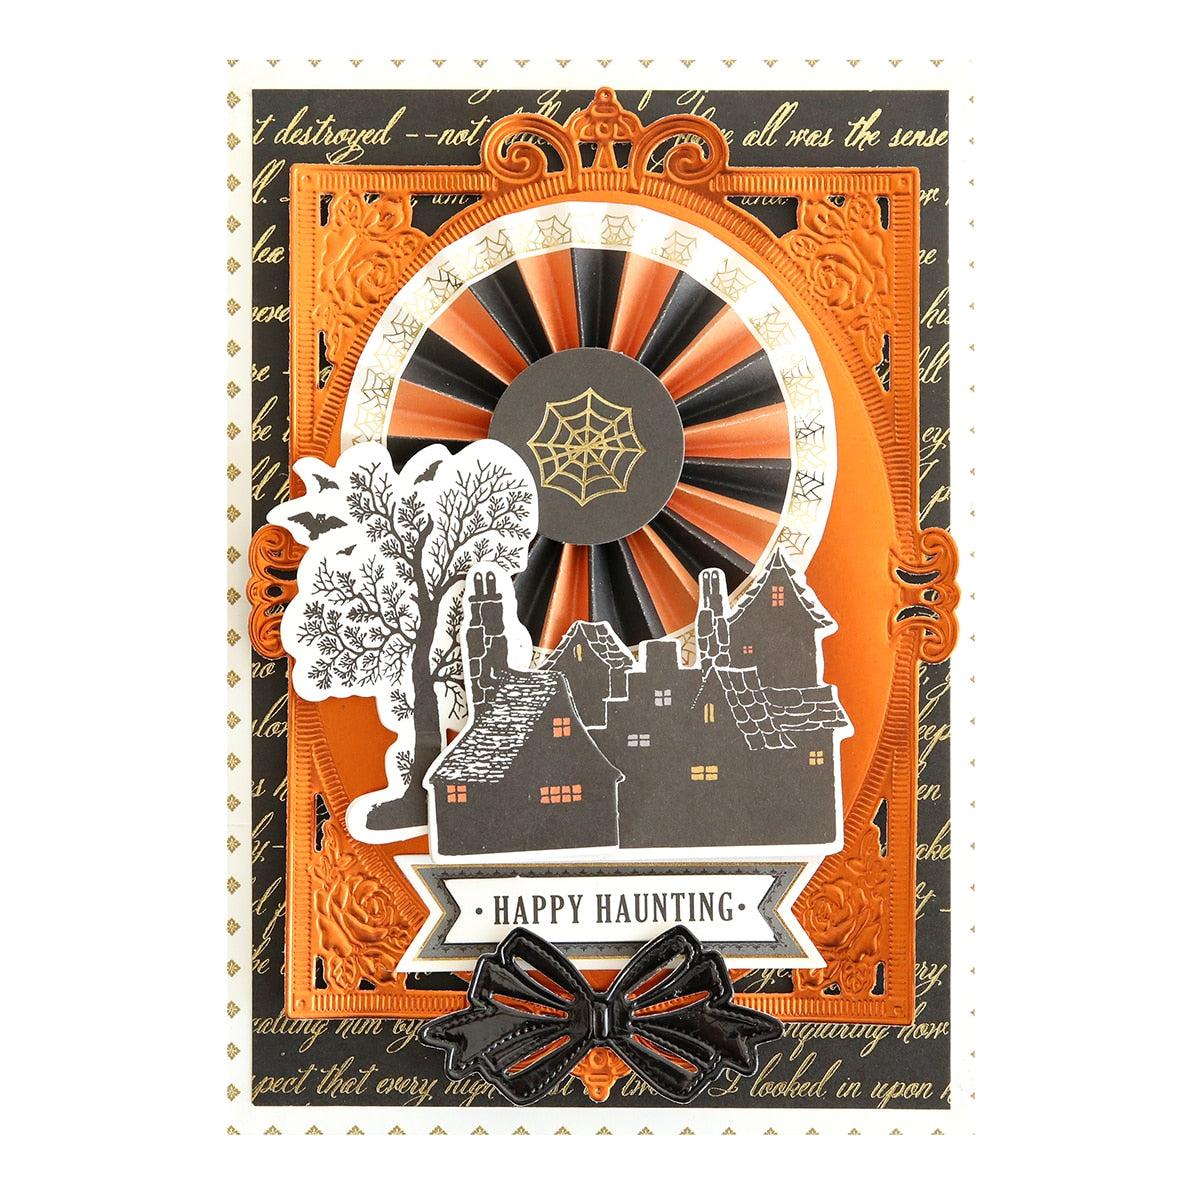 A Halloween card with a Perfectly Scary Rosettes design.